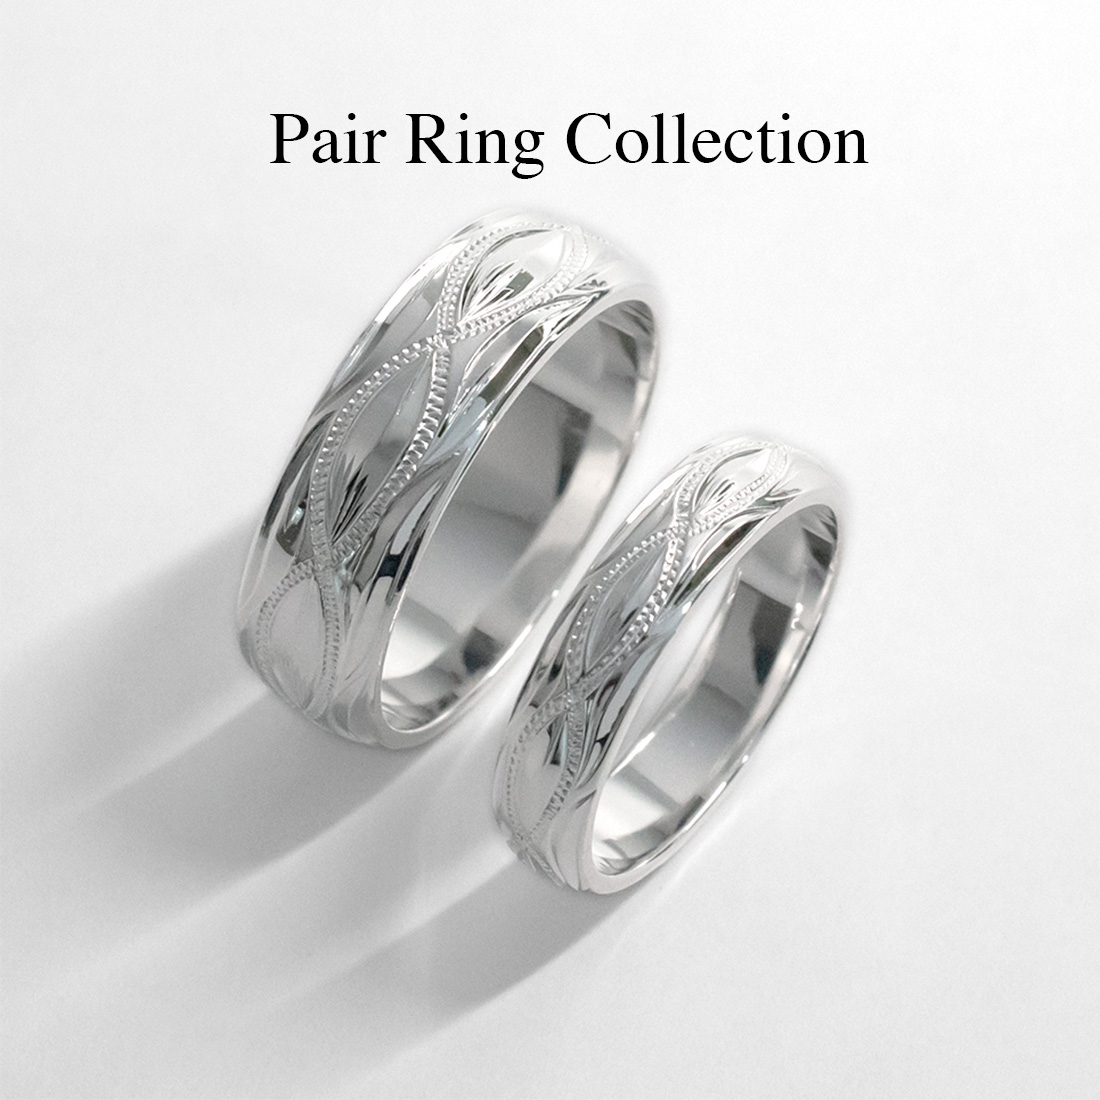 Pair Ring Collection